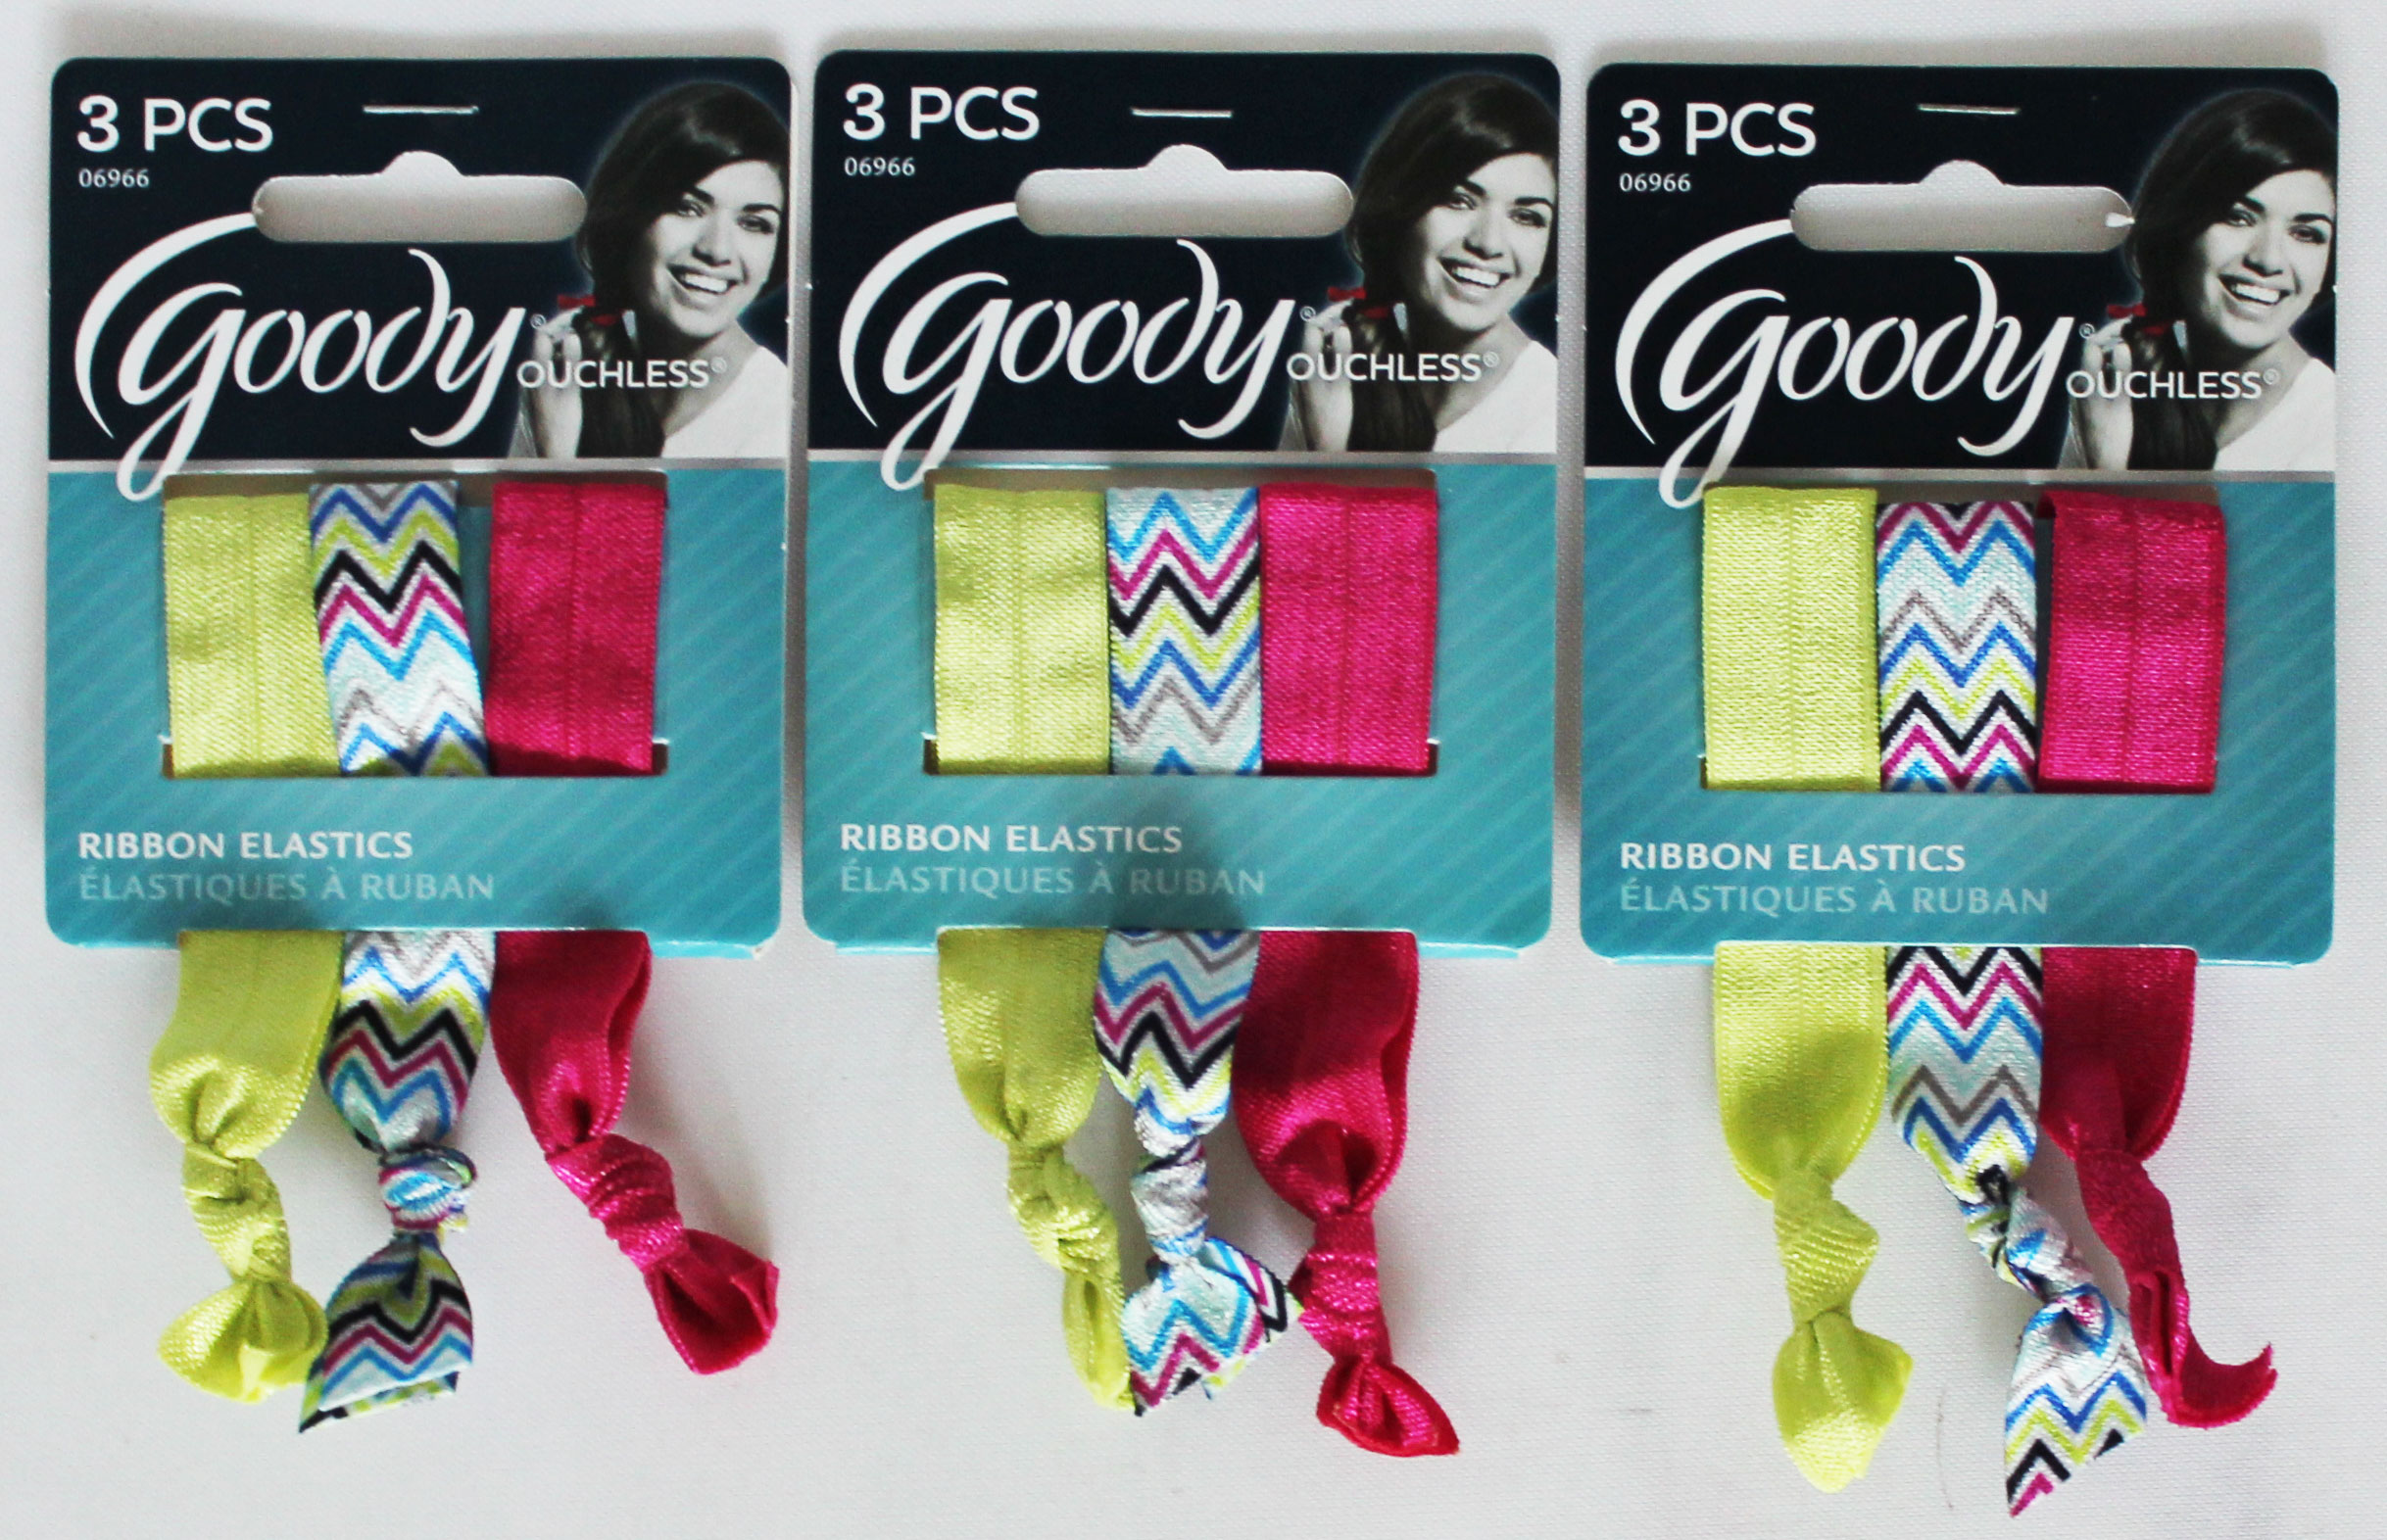 Goody Ouchless Ribbon Elastics (Pack of 3) 1ct